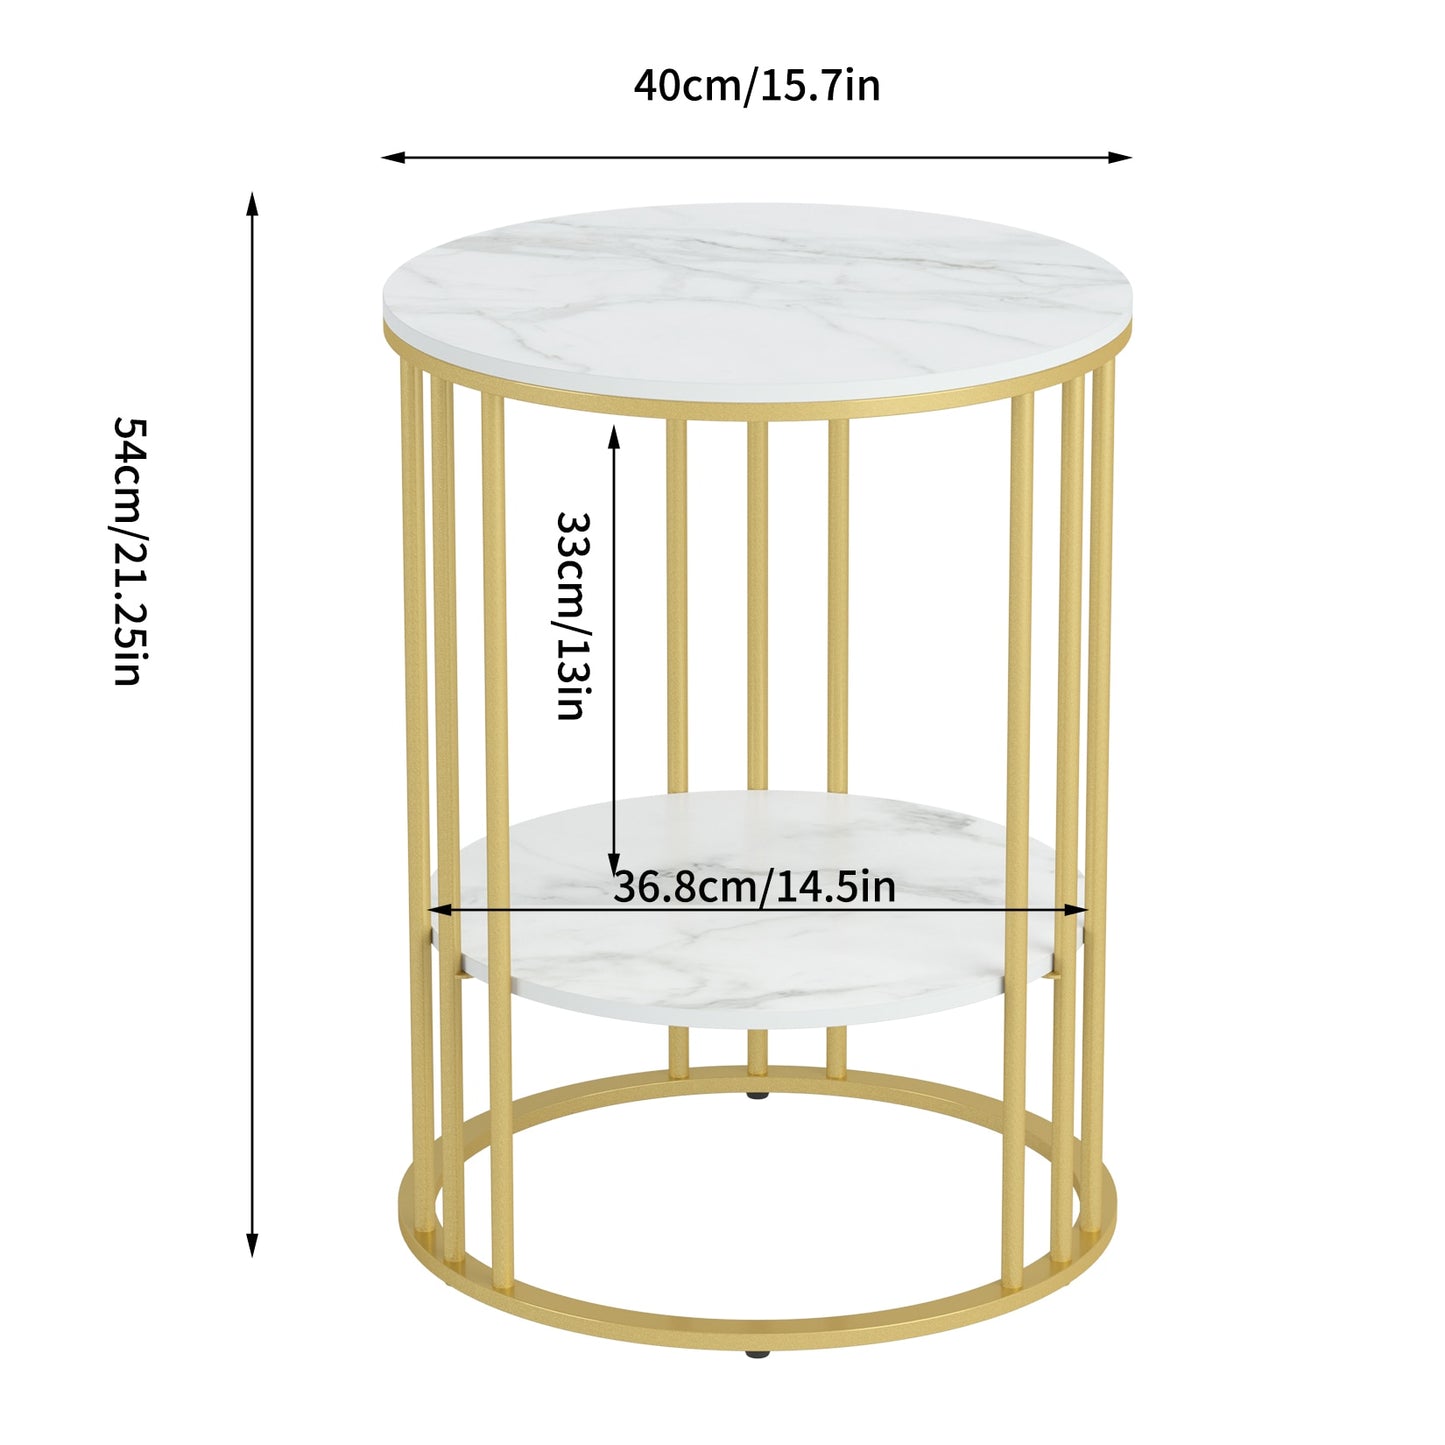 Coffee Tables | 16" round side table, _wf_cus, Bedroom Side Table, Coffee Table, coffee table nordic, coffee table wayfair, Featured, Luxury coffee table, modern, Nordic Coffee Table, Round S